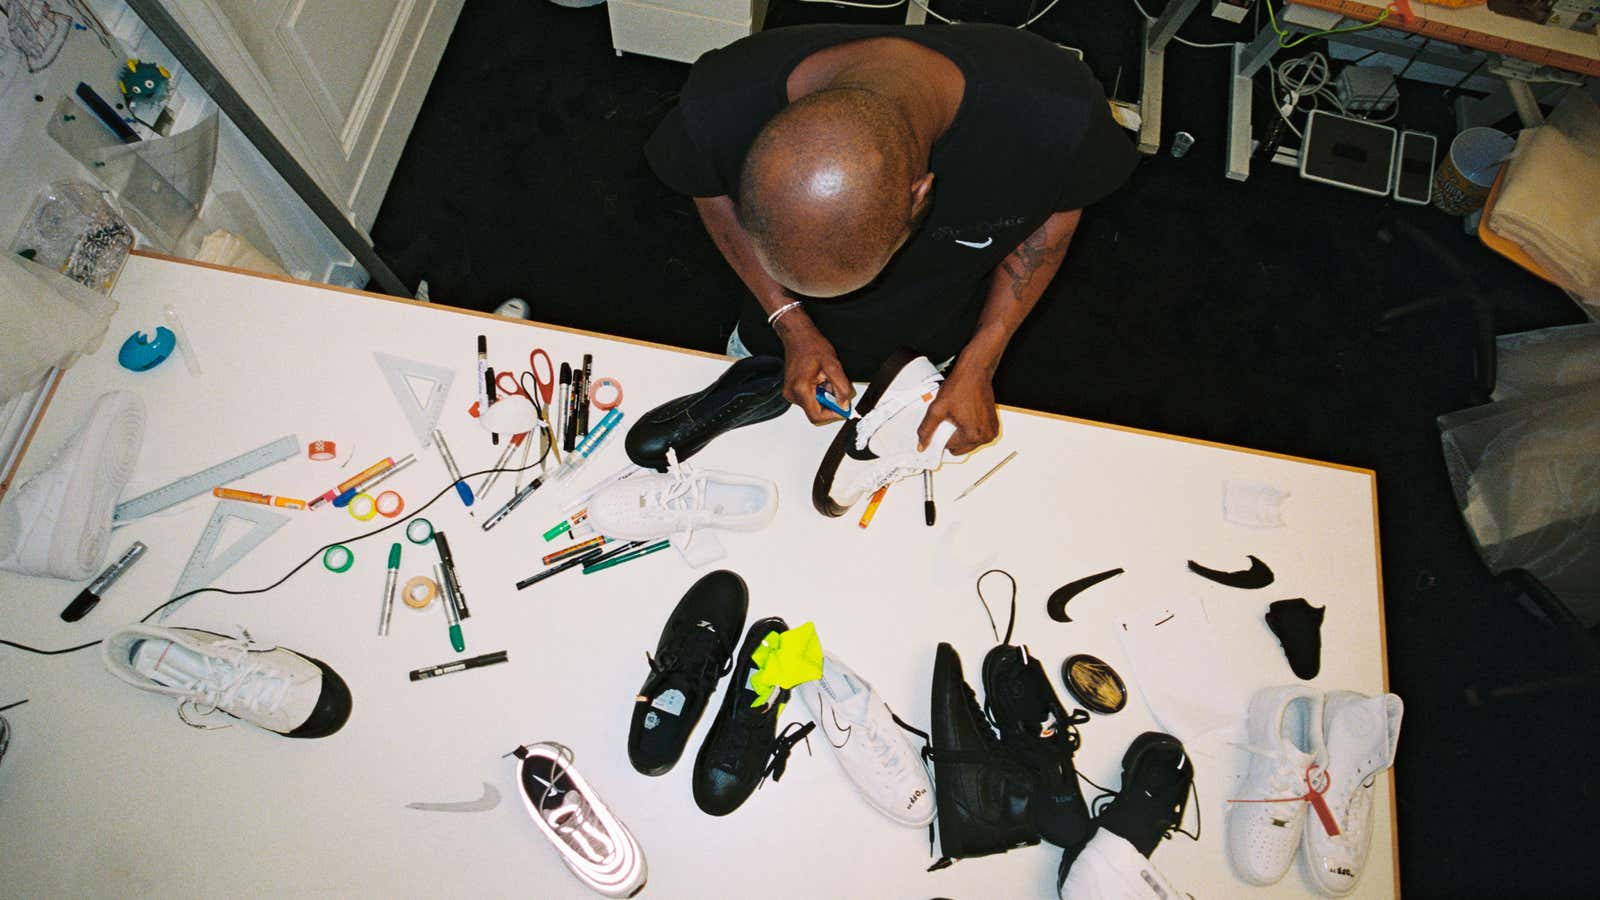 Nike Dropped a 258-Page Book on Virgil Abloh's 'The Ten' Collection